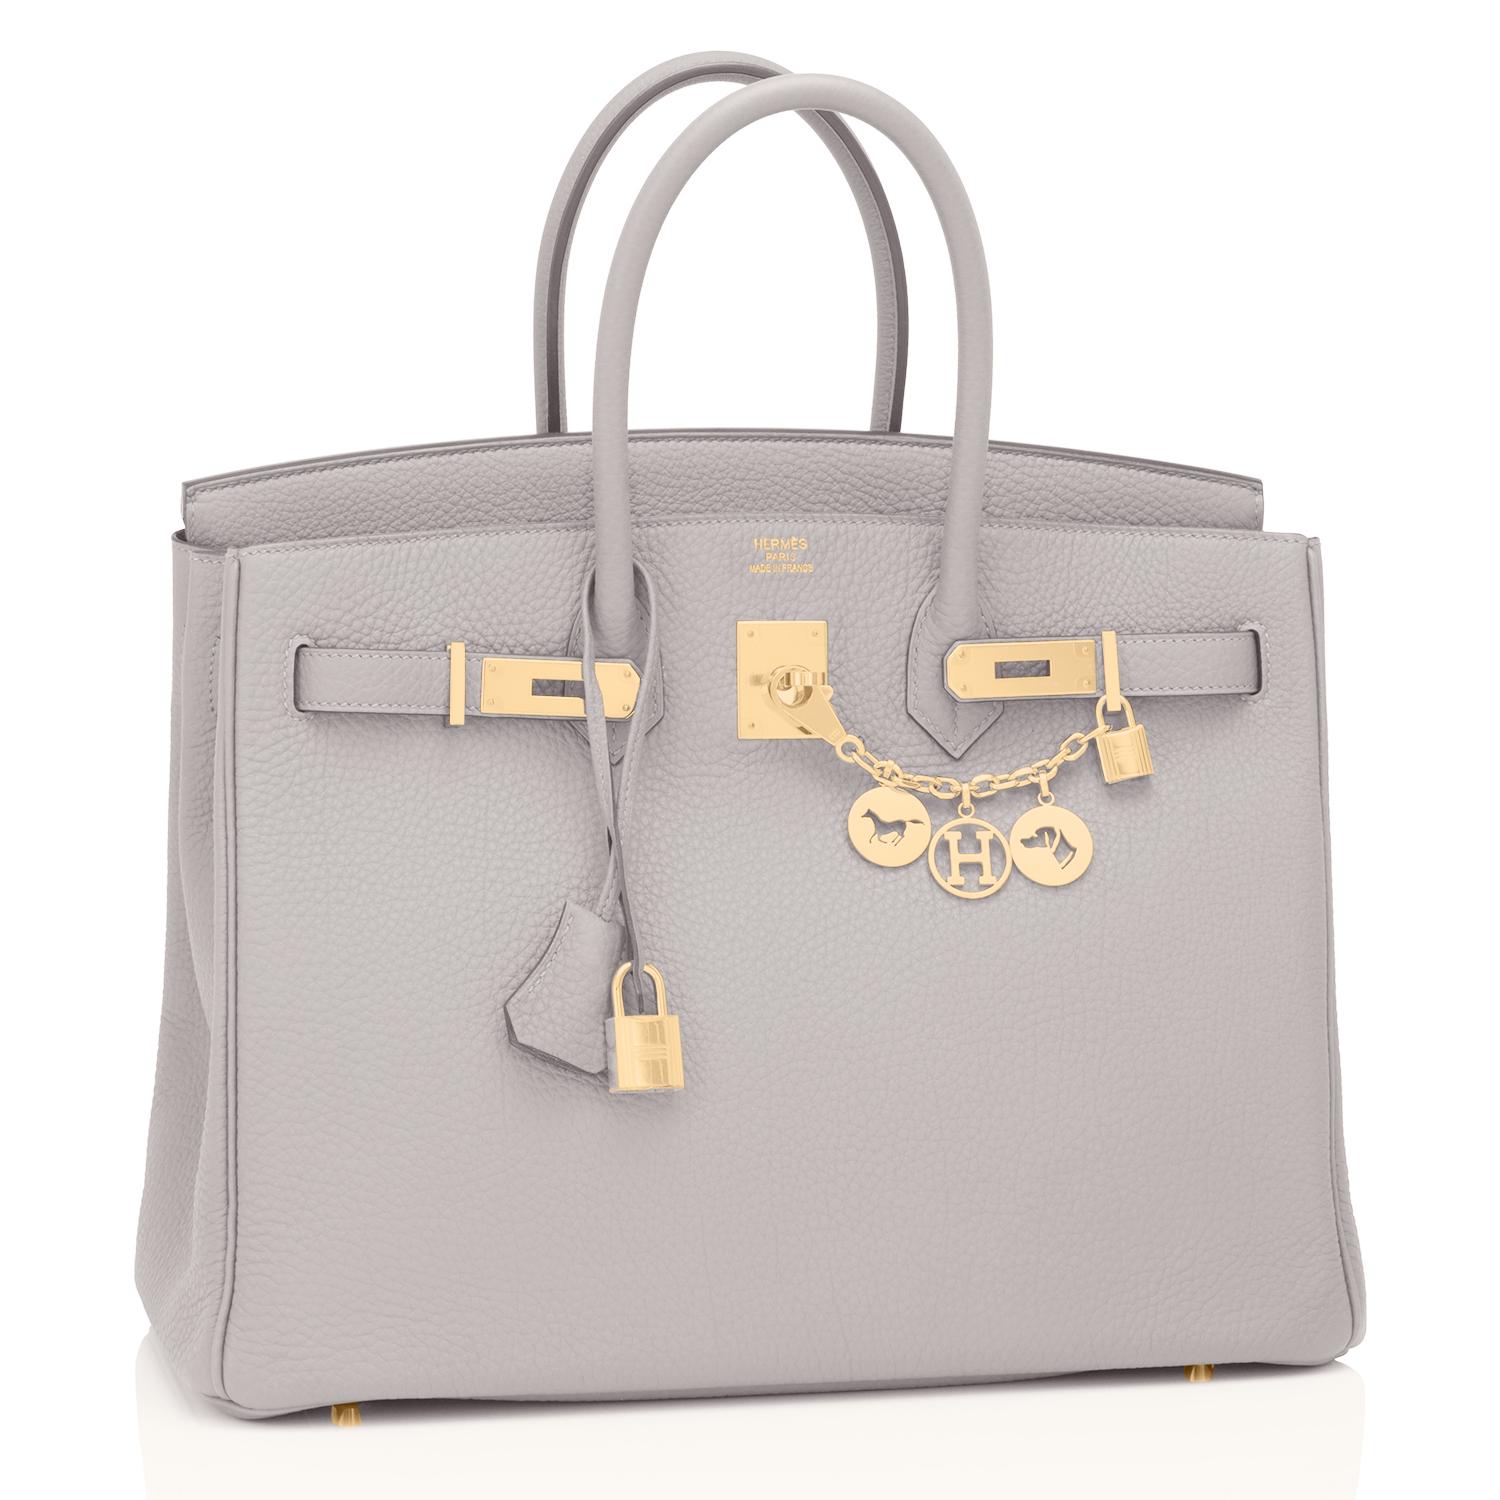 Guaranteed Authentic Hermes Birkin 35cm Gris Perle Pearl Gray Gold Hardware Y Stamp, 2020
Just purchased from Hermes store; bag bears new interior 2020 Y Stamp.
Brand New in Box in Store Fresh, Pristine Condition (with plastic on hardware)
Perfect